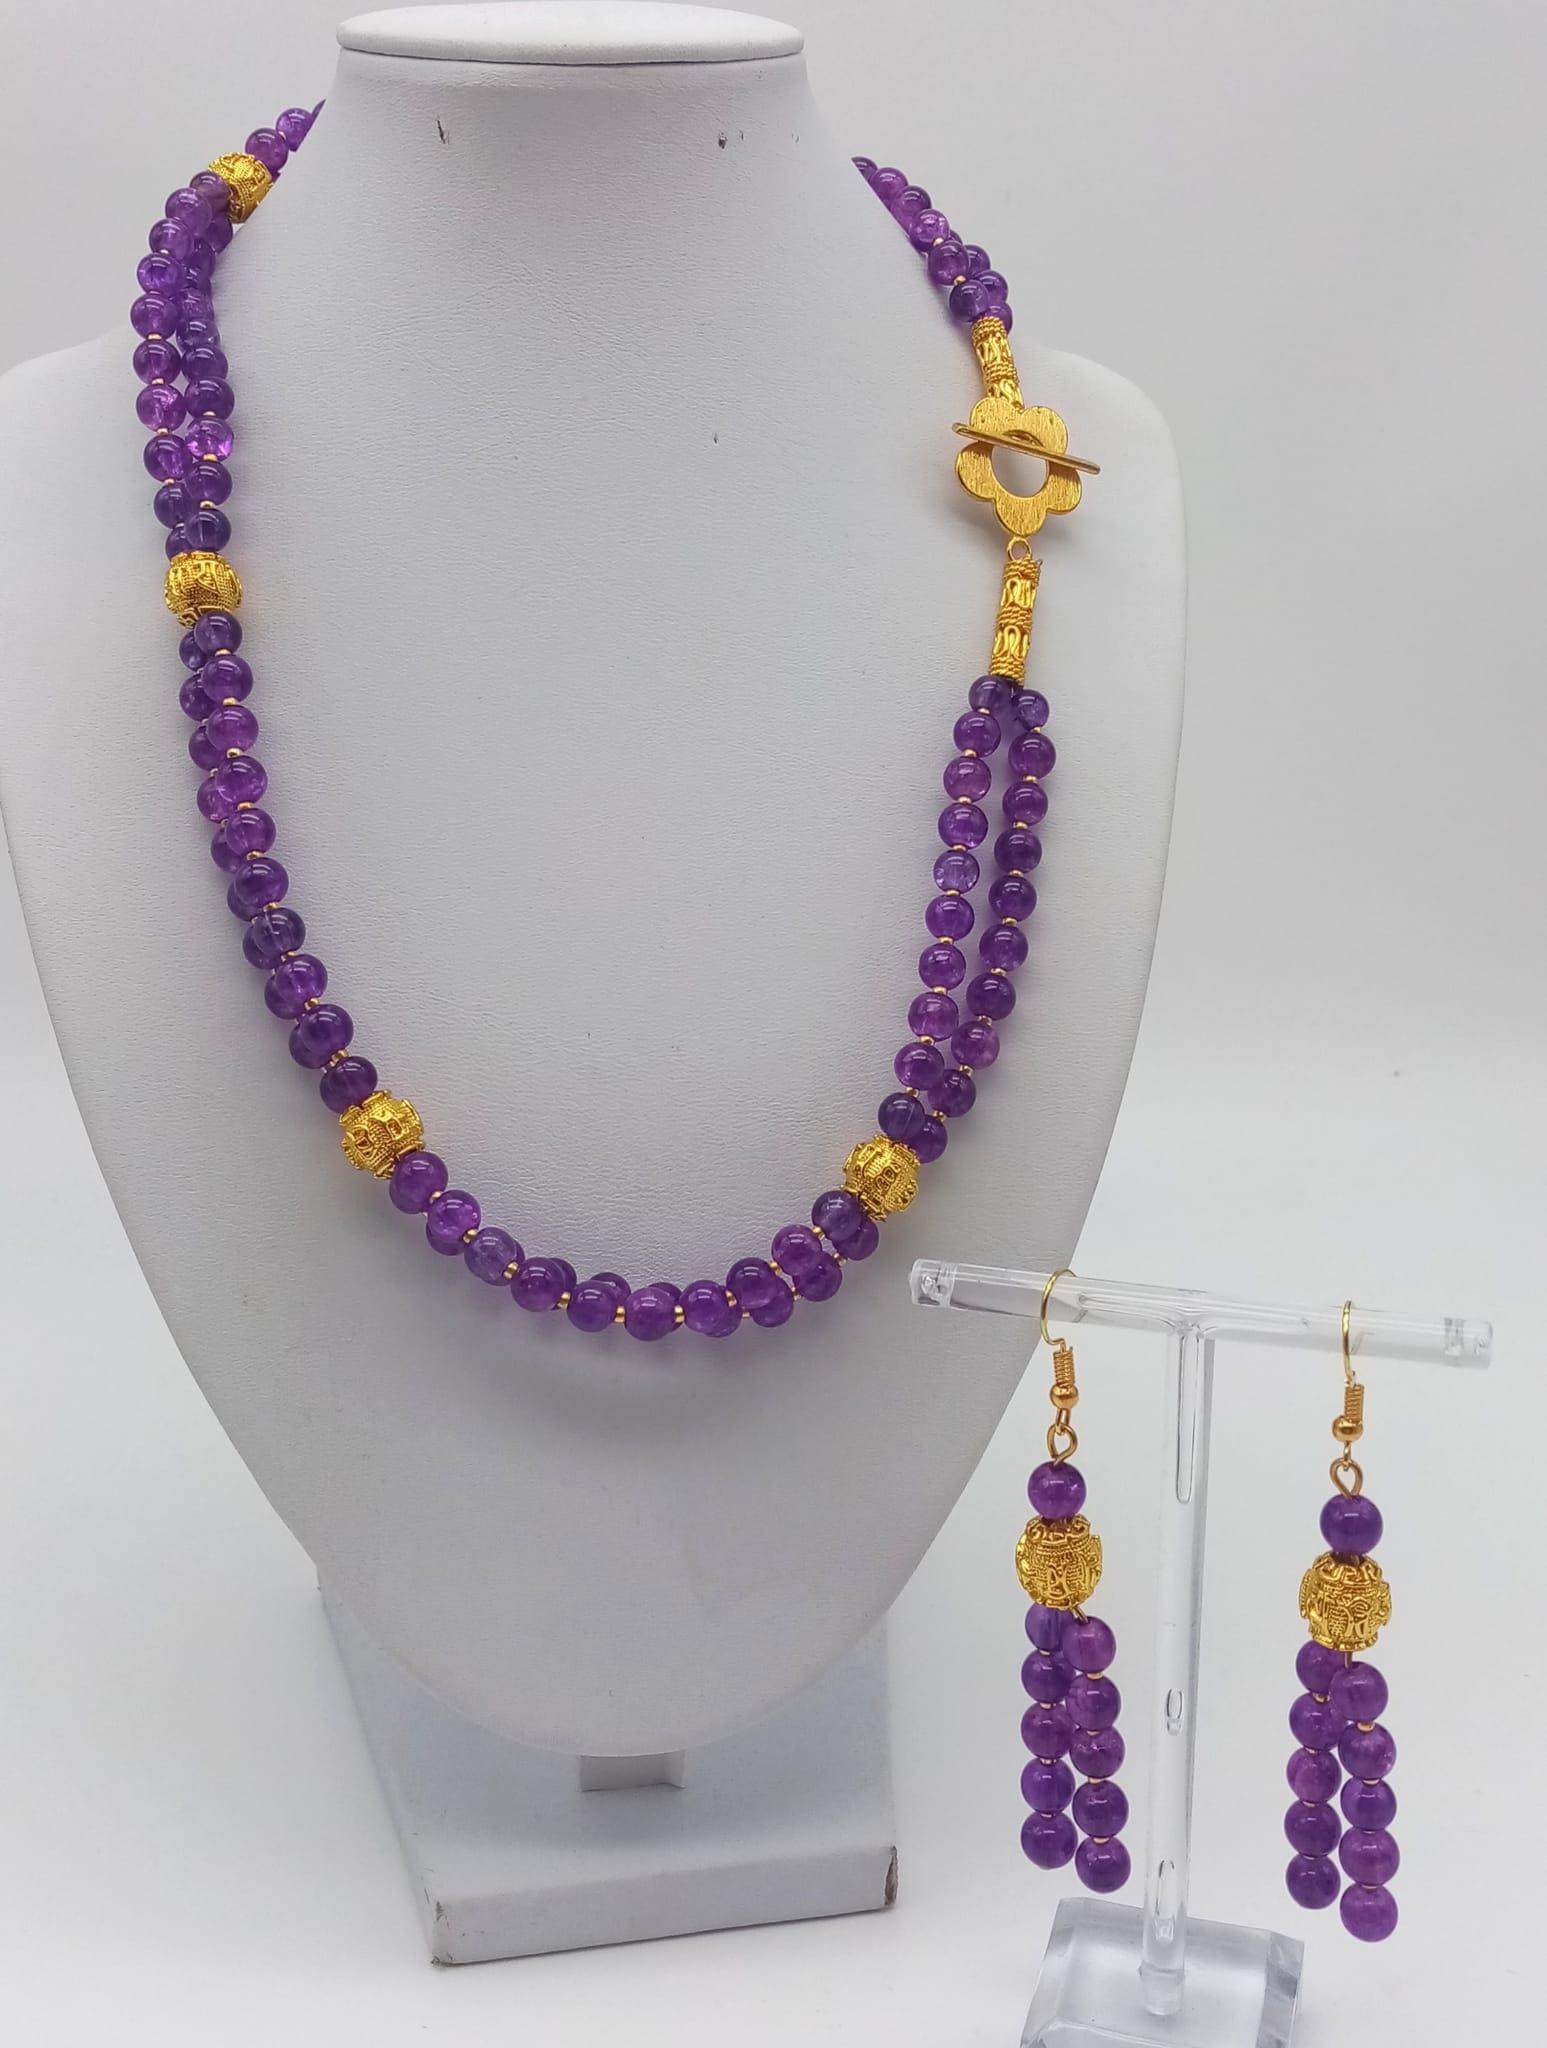 A double row of round amethysts necklace and earrings set with 18 K yellow gold plated highlights.